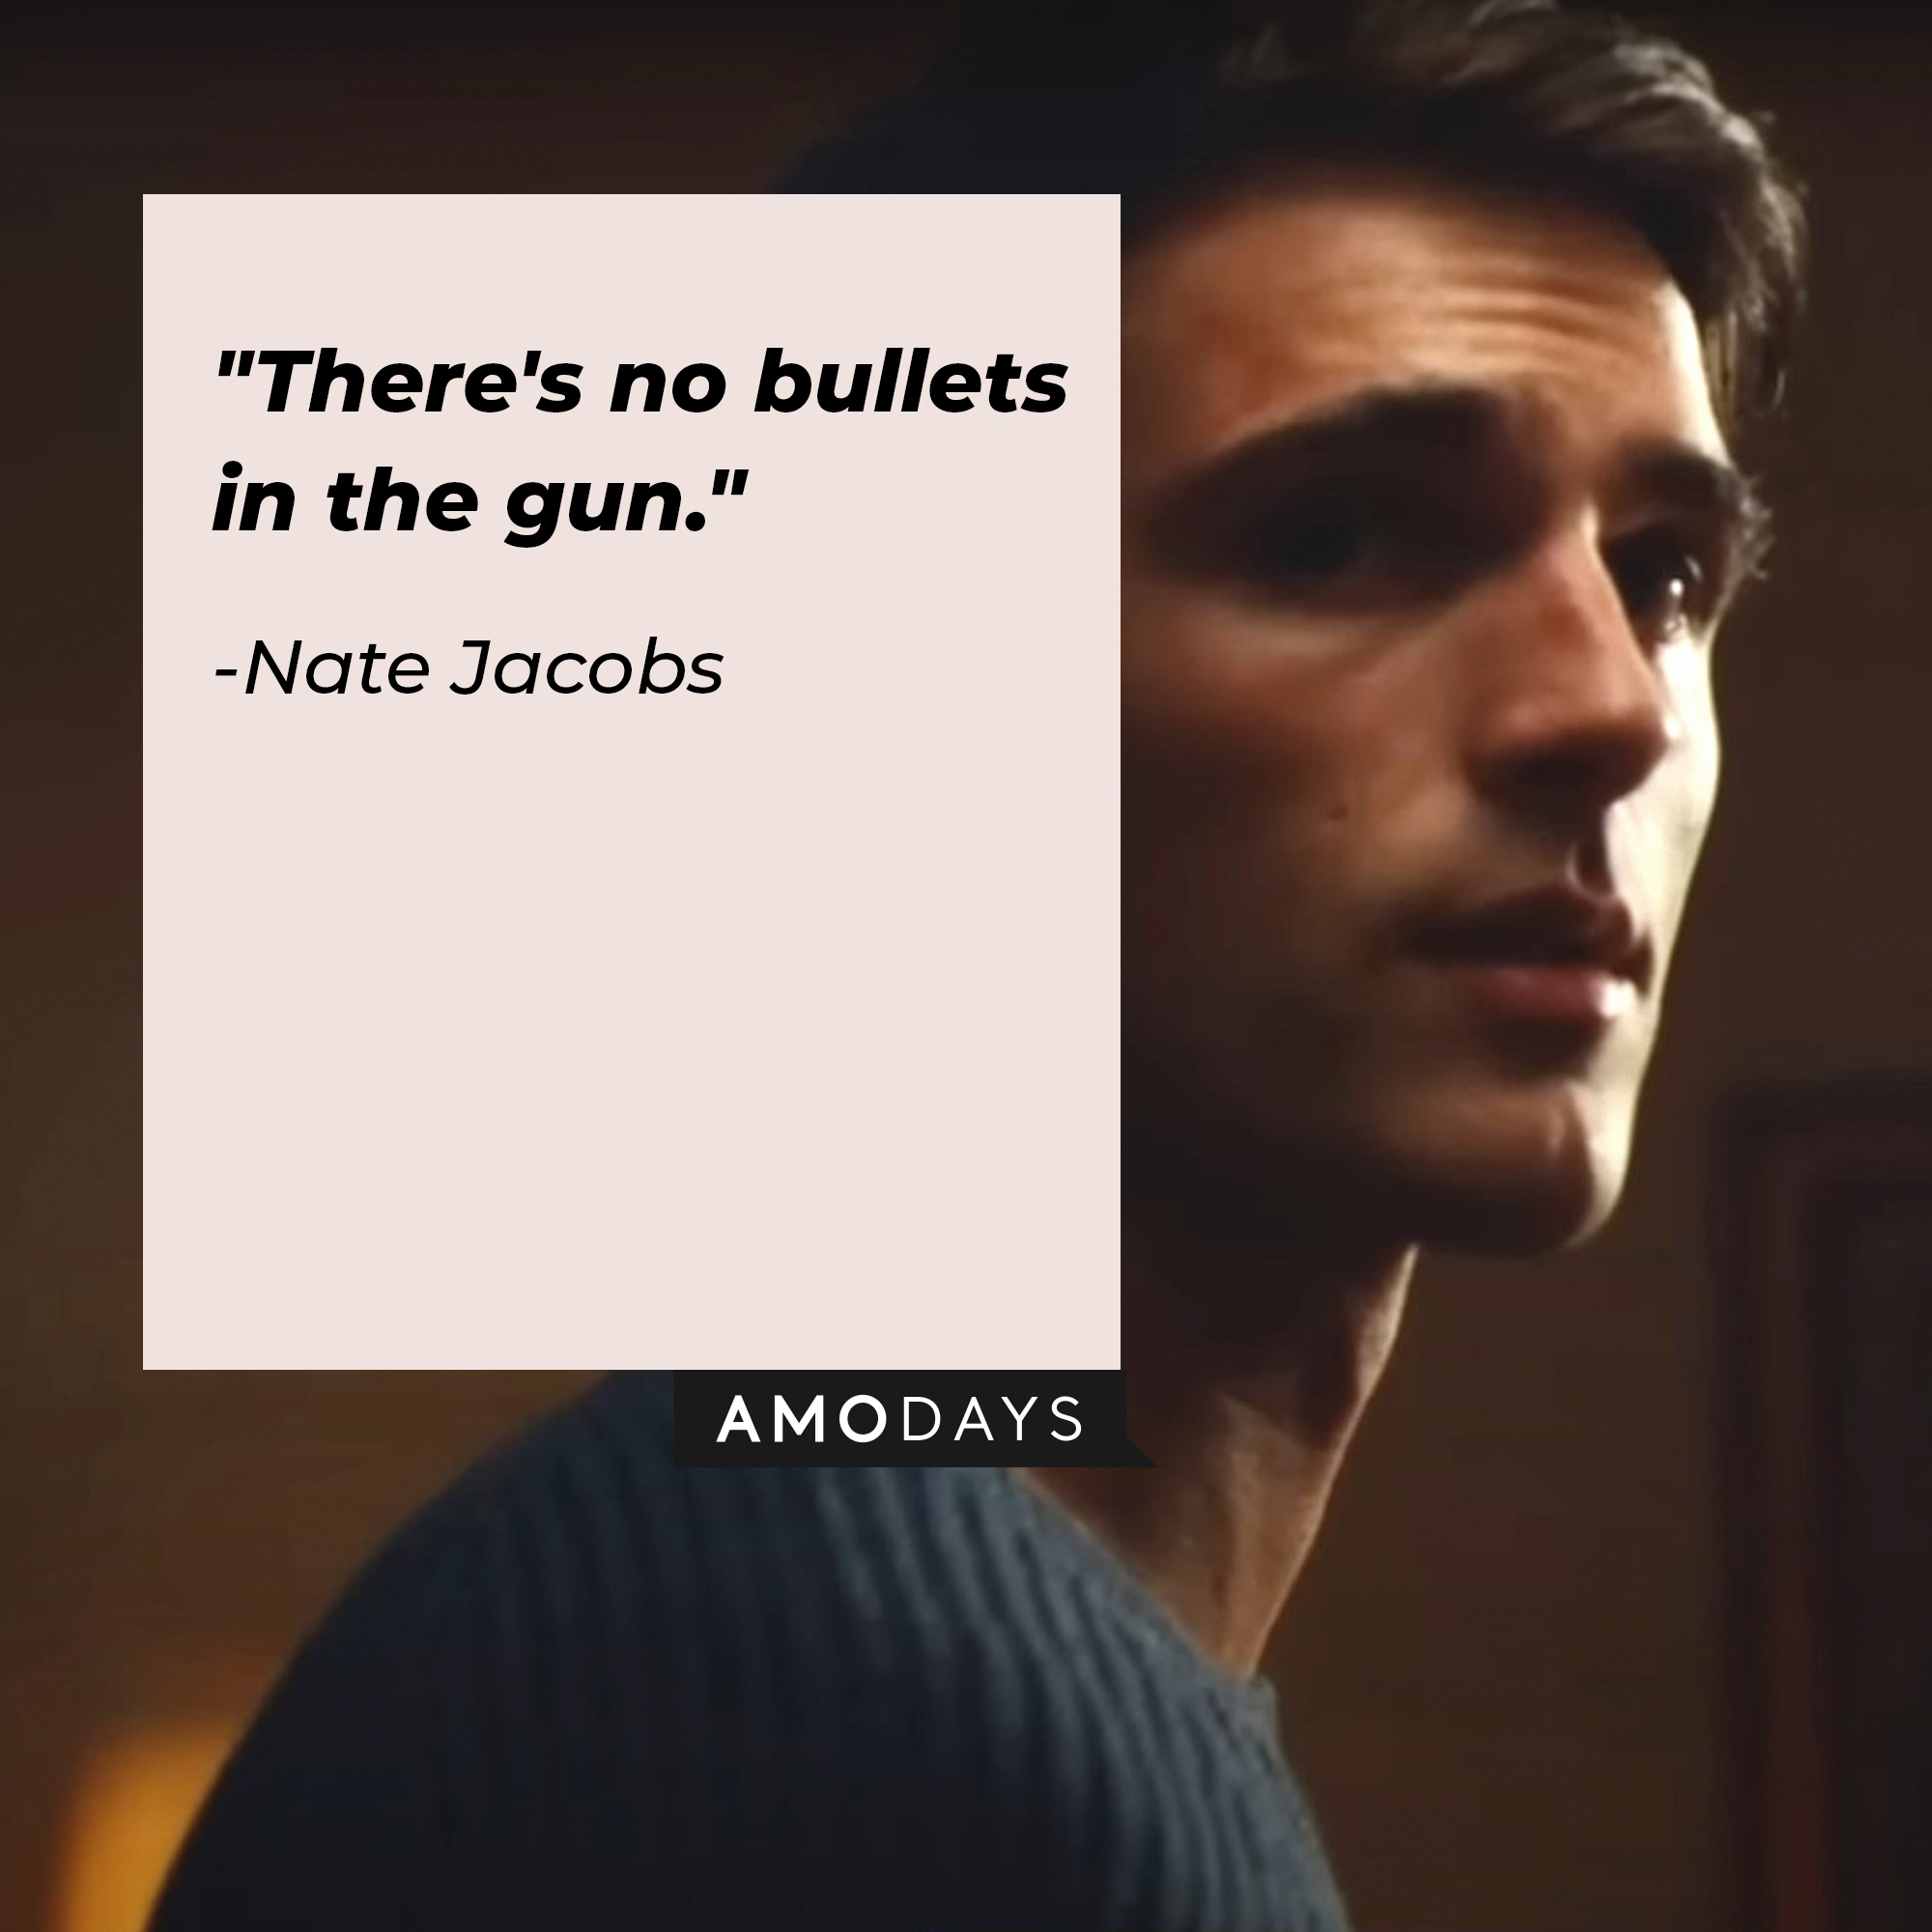 An image of Nate Jacobs with his quote: "There's no bullets in the gun." | Source: facebook.com/Euphoria